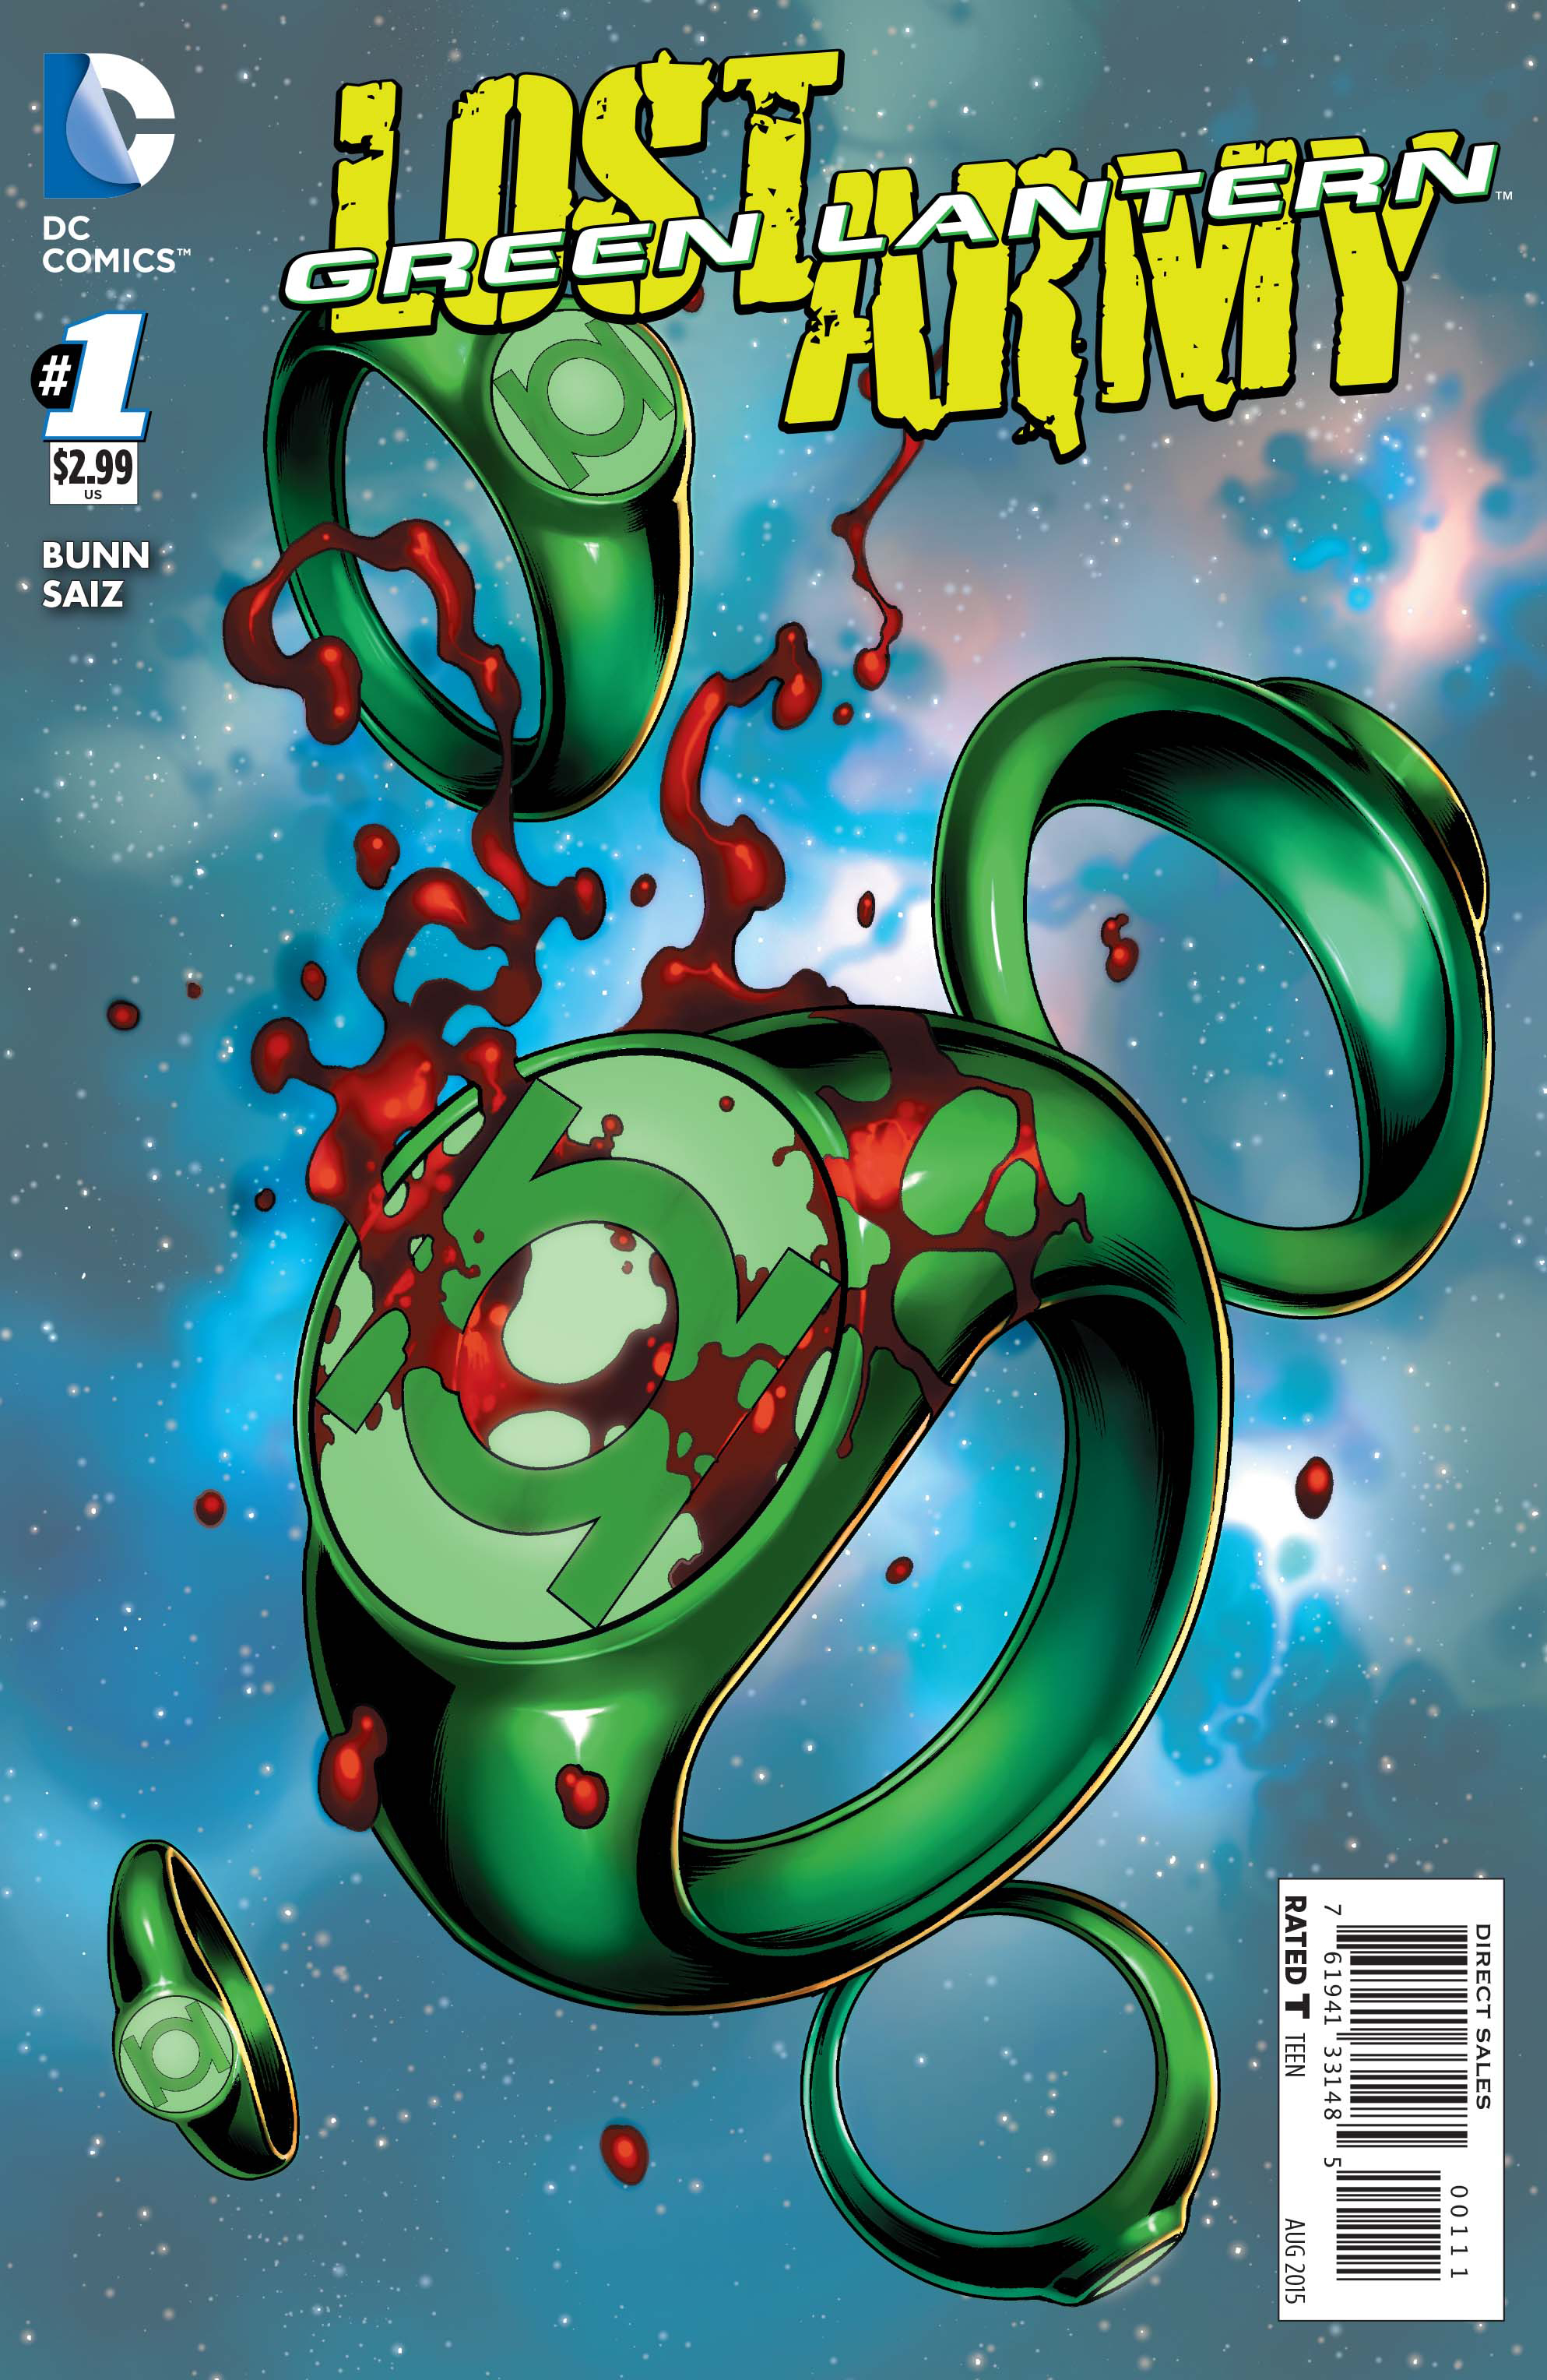 GREEN LANTERN THE LOST ARMY #1